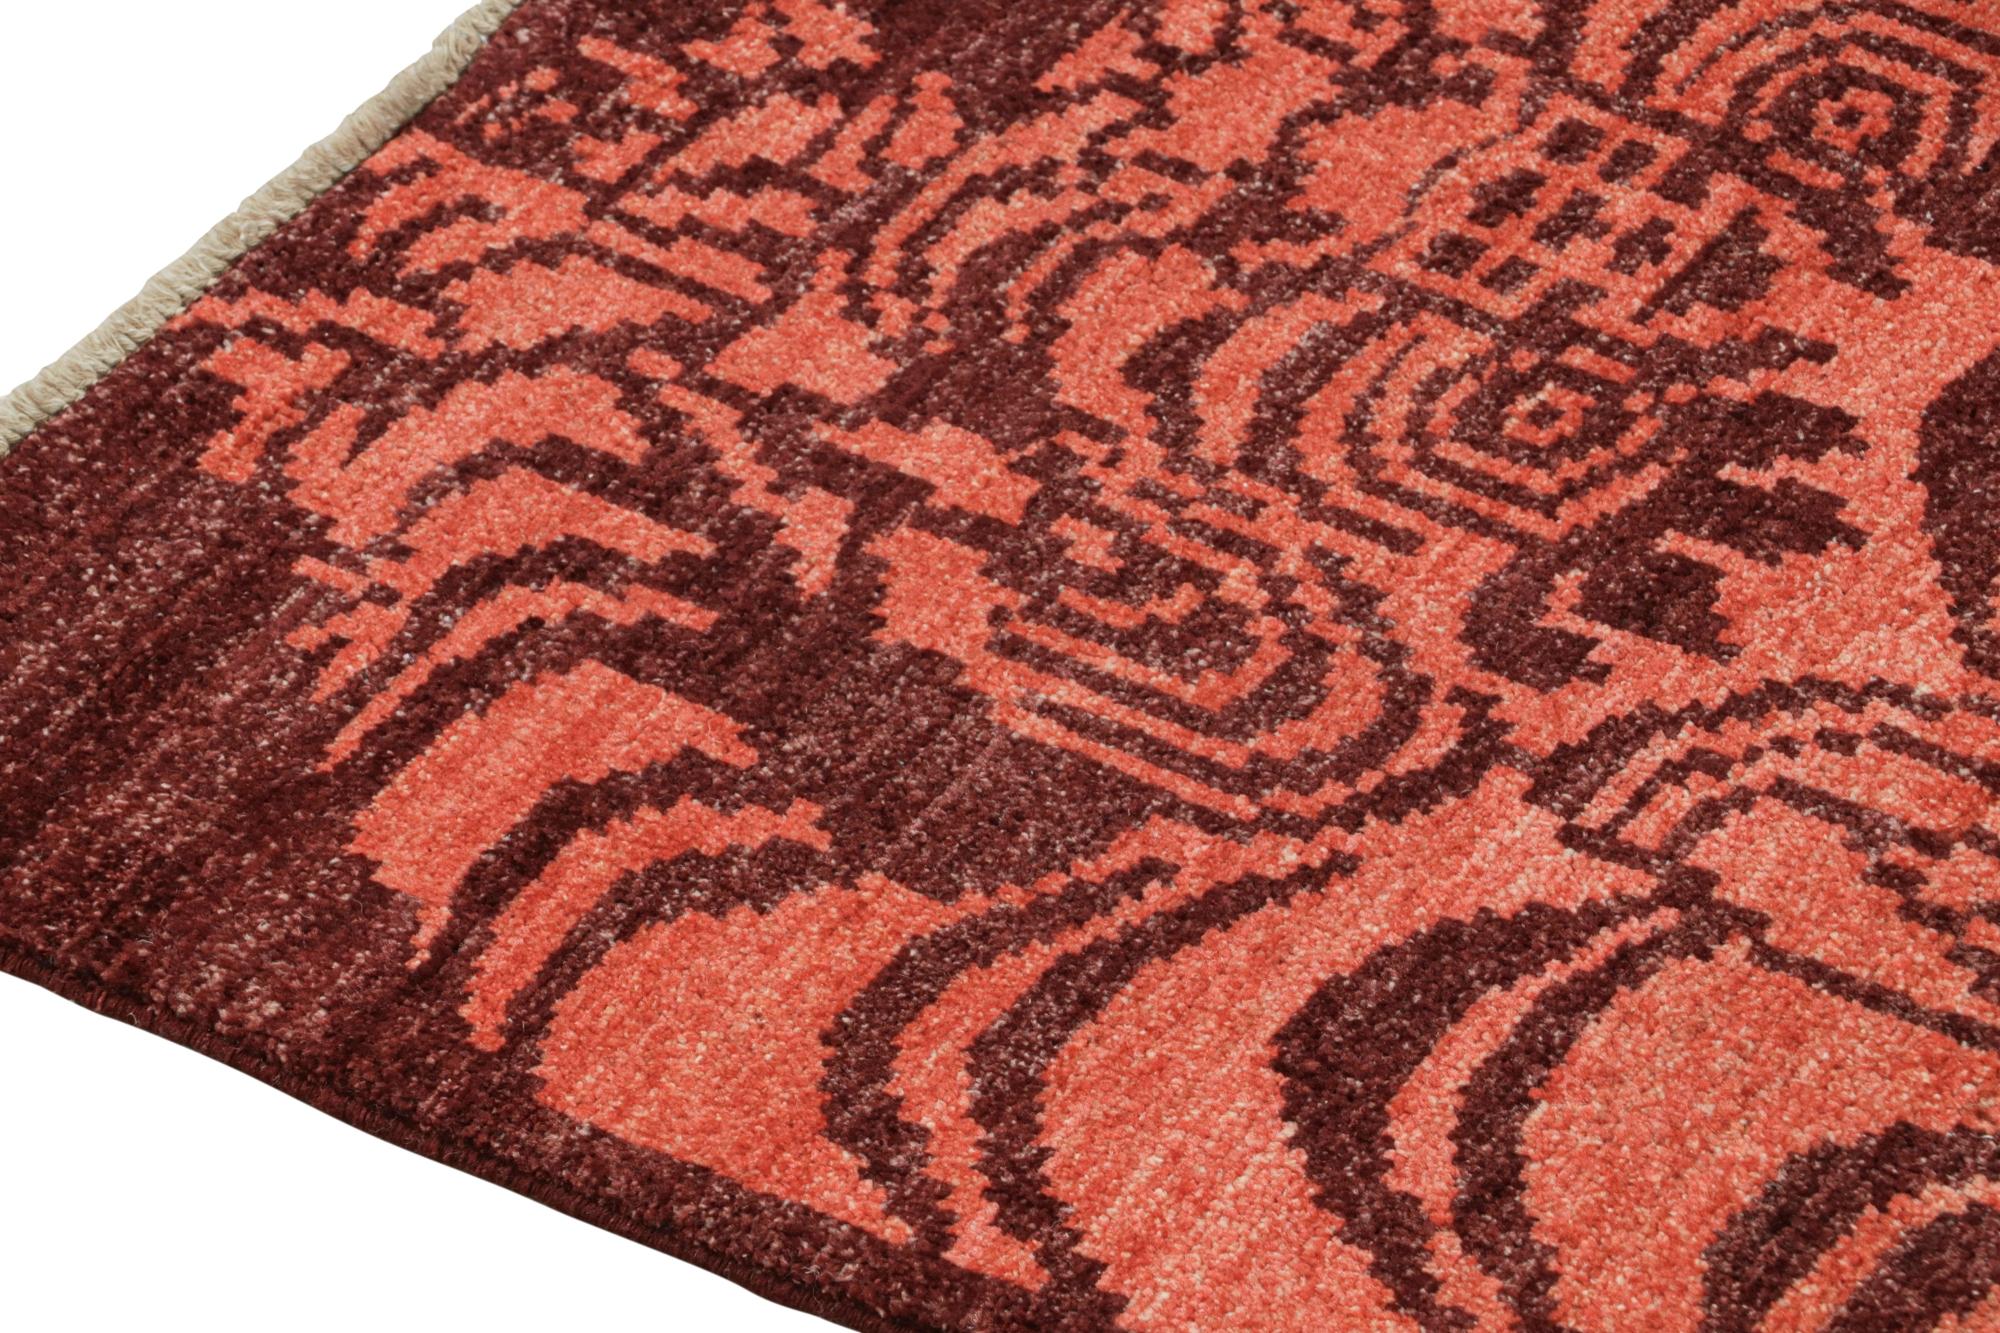 Tapis & Kilim's Classic Style Tiger Runner in Orange and Red Pictorial (en anglais) Neuf - En vente à Long Island City, NY